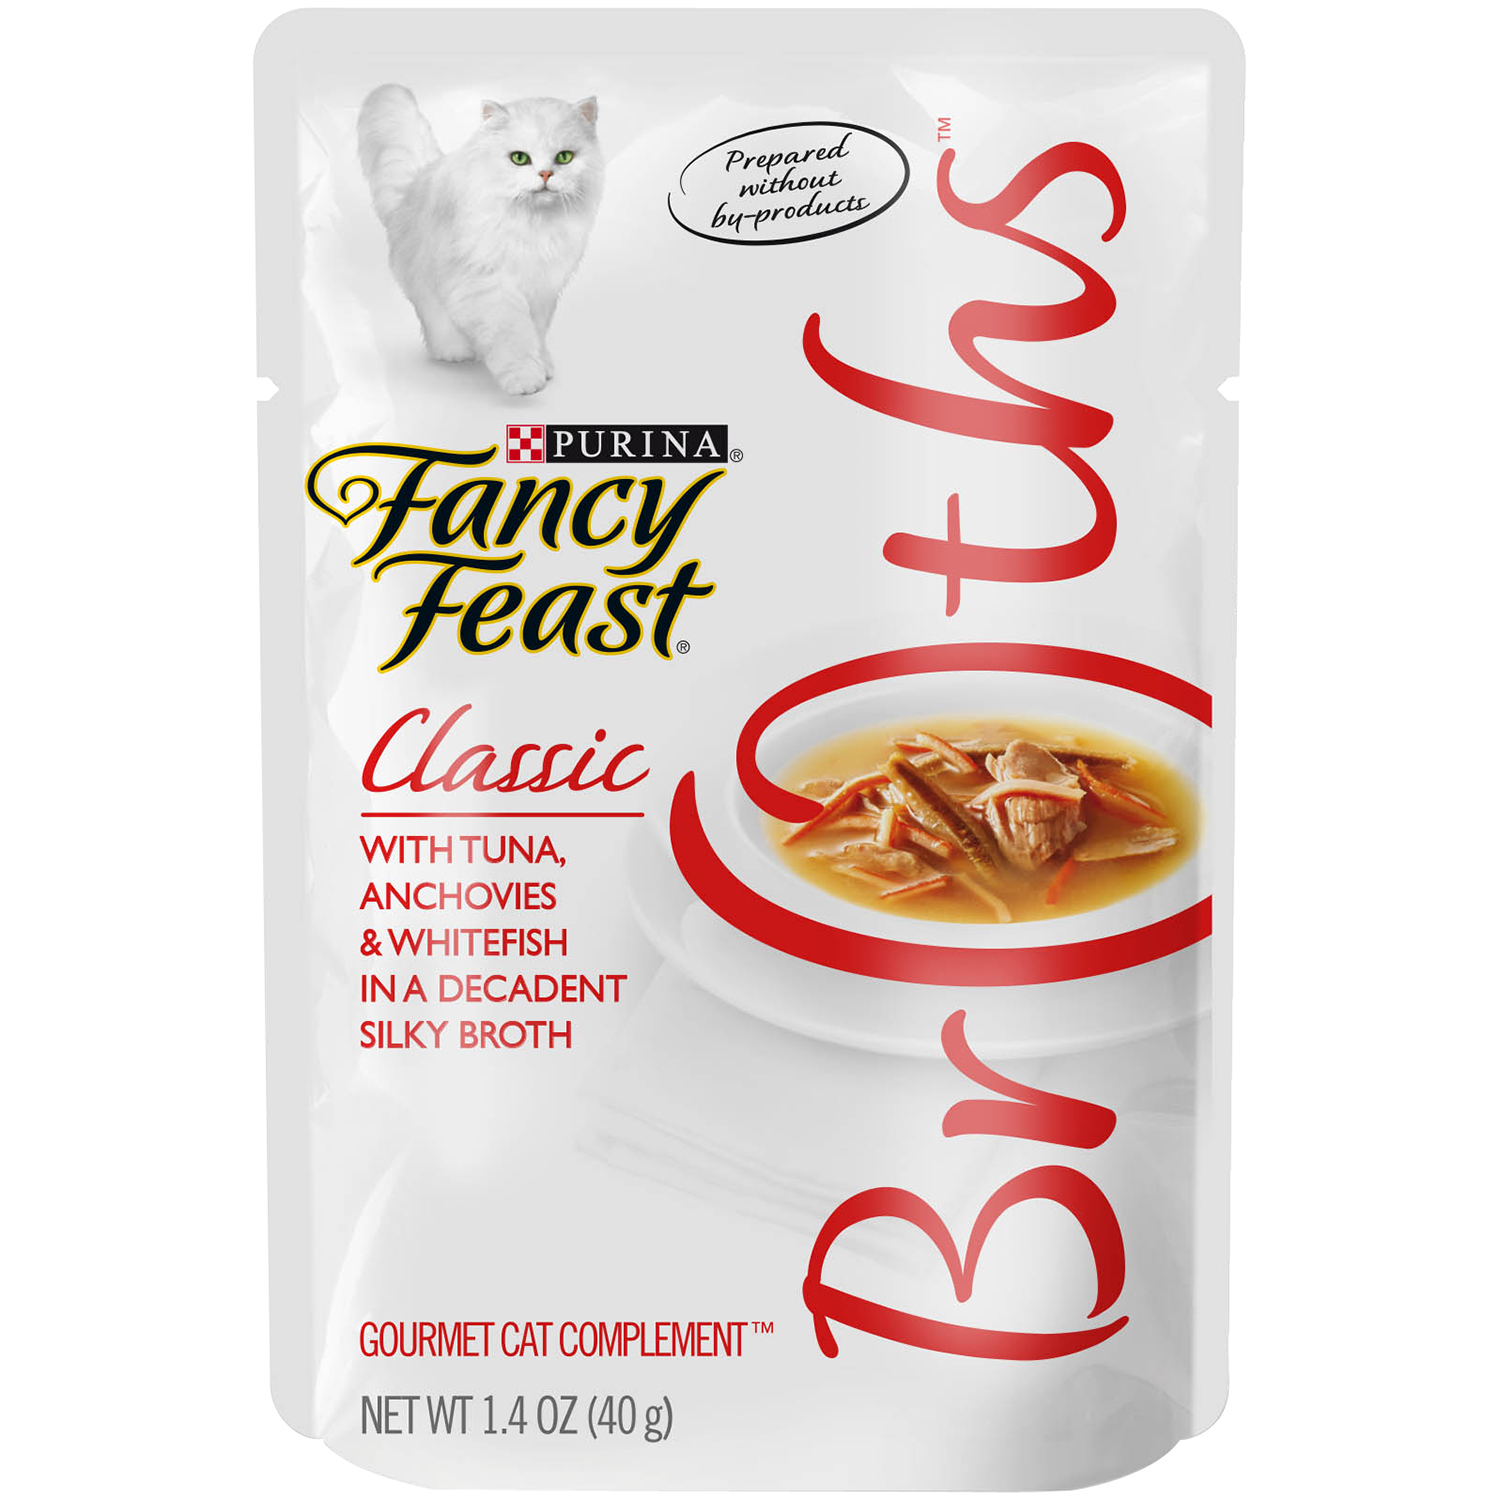 0050000291090 - CLASSIC WITH TUNA ANCHOVIES & WHITEFISH CAT FOOD 1.4 OZ